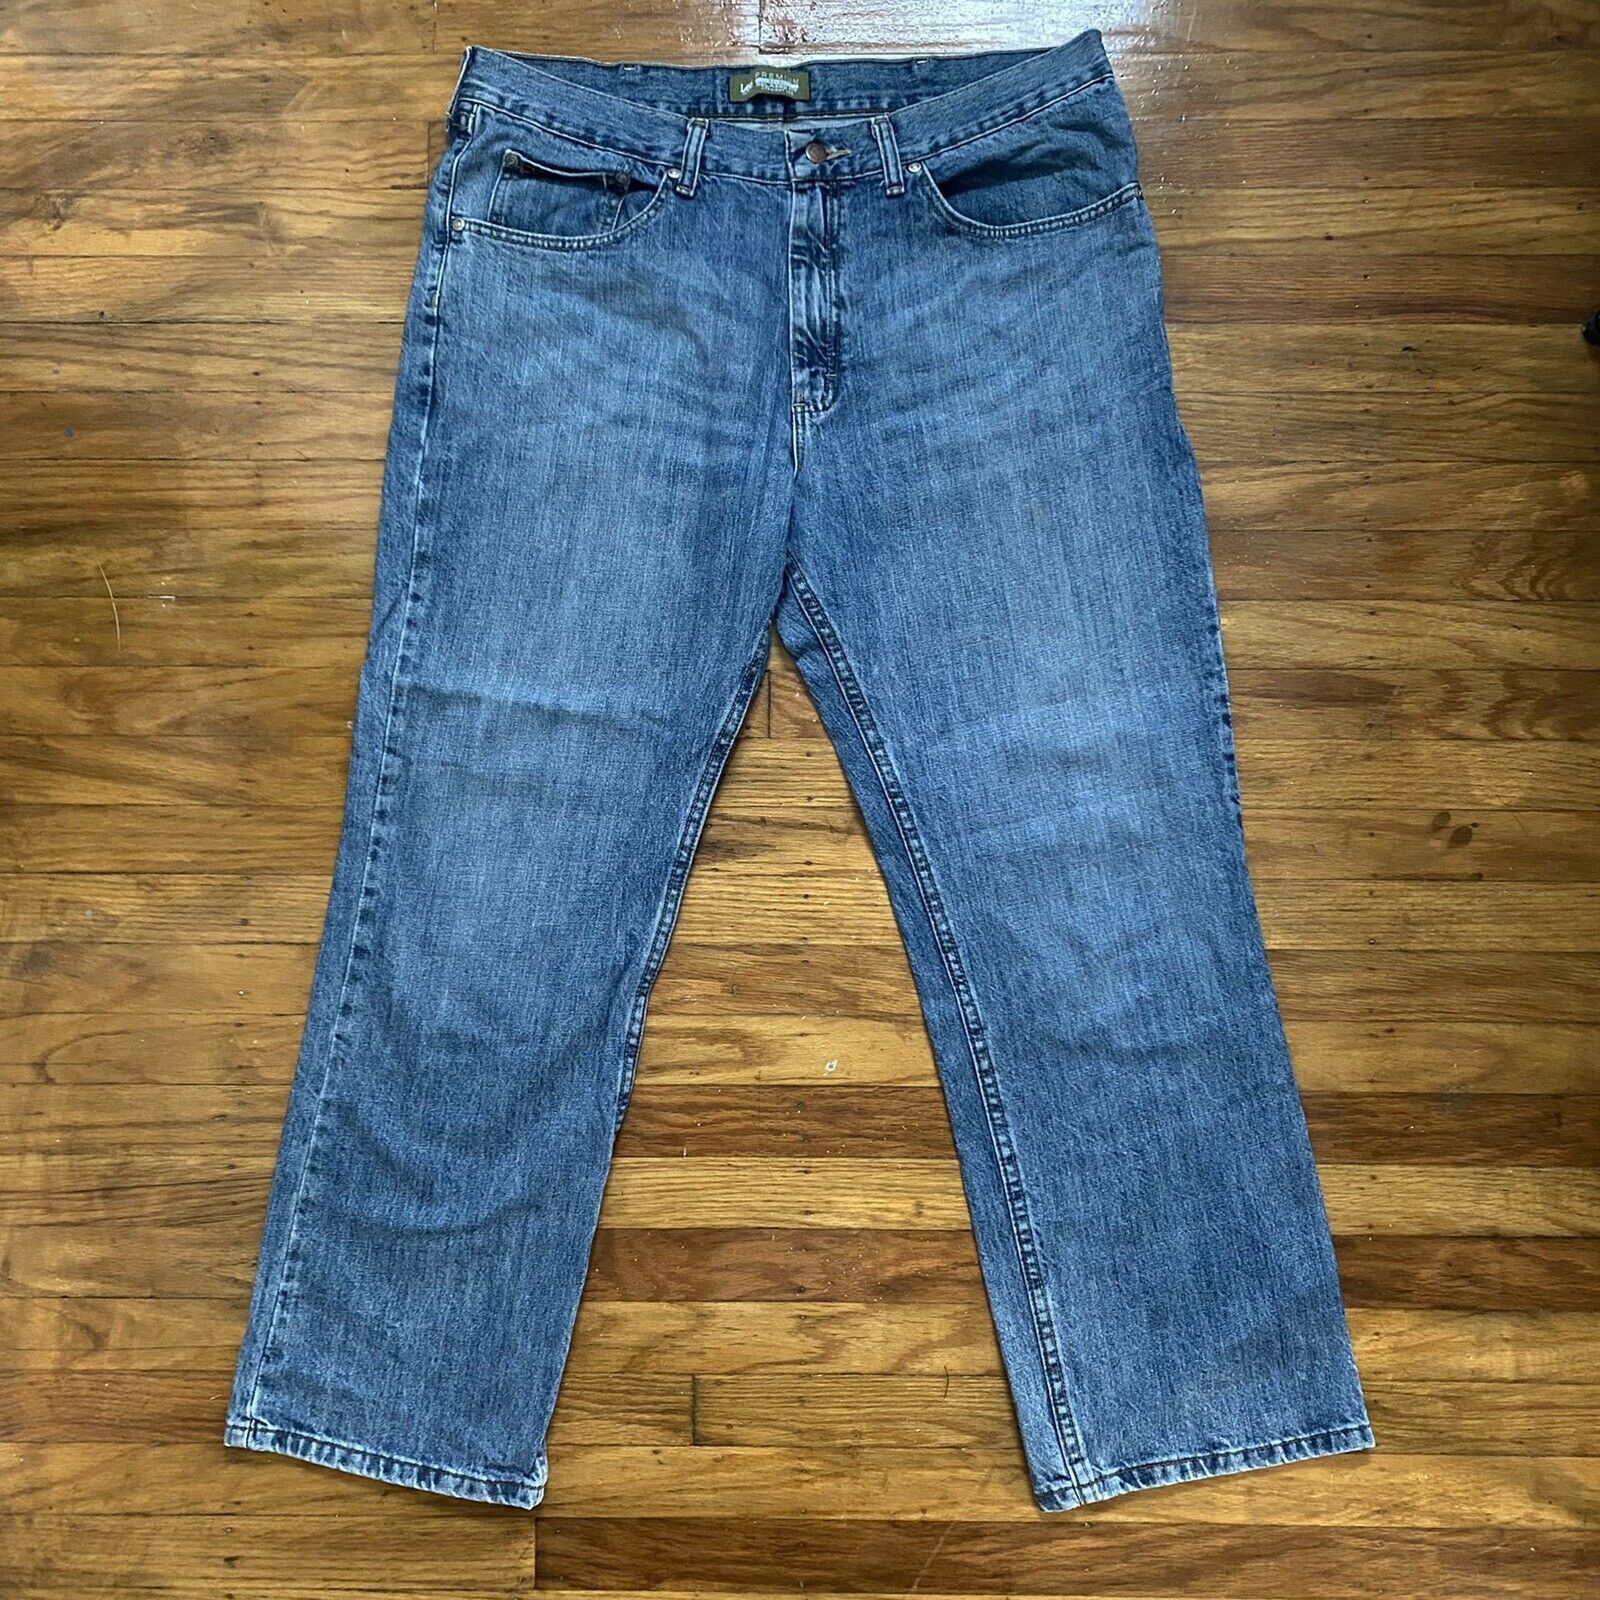 Lee LEE Premium Select 38x30 Jeans Blue Relaxed Fit Straight | Grailed